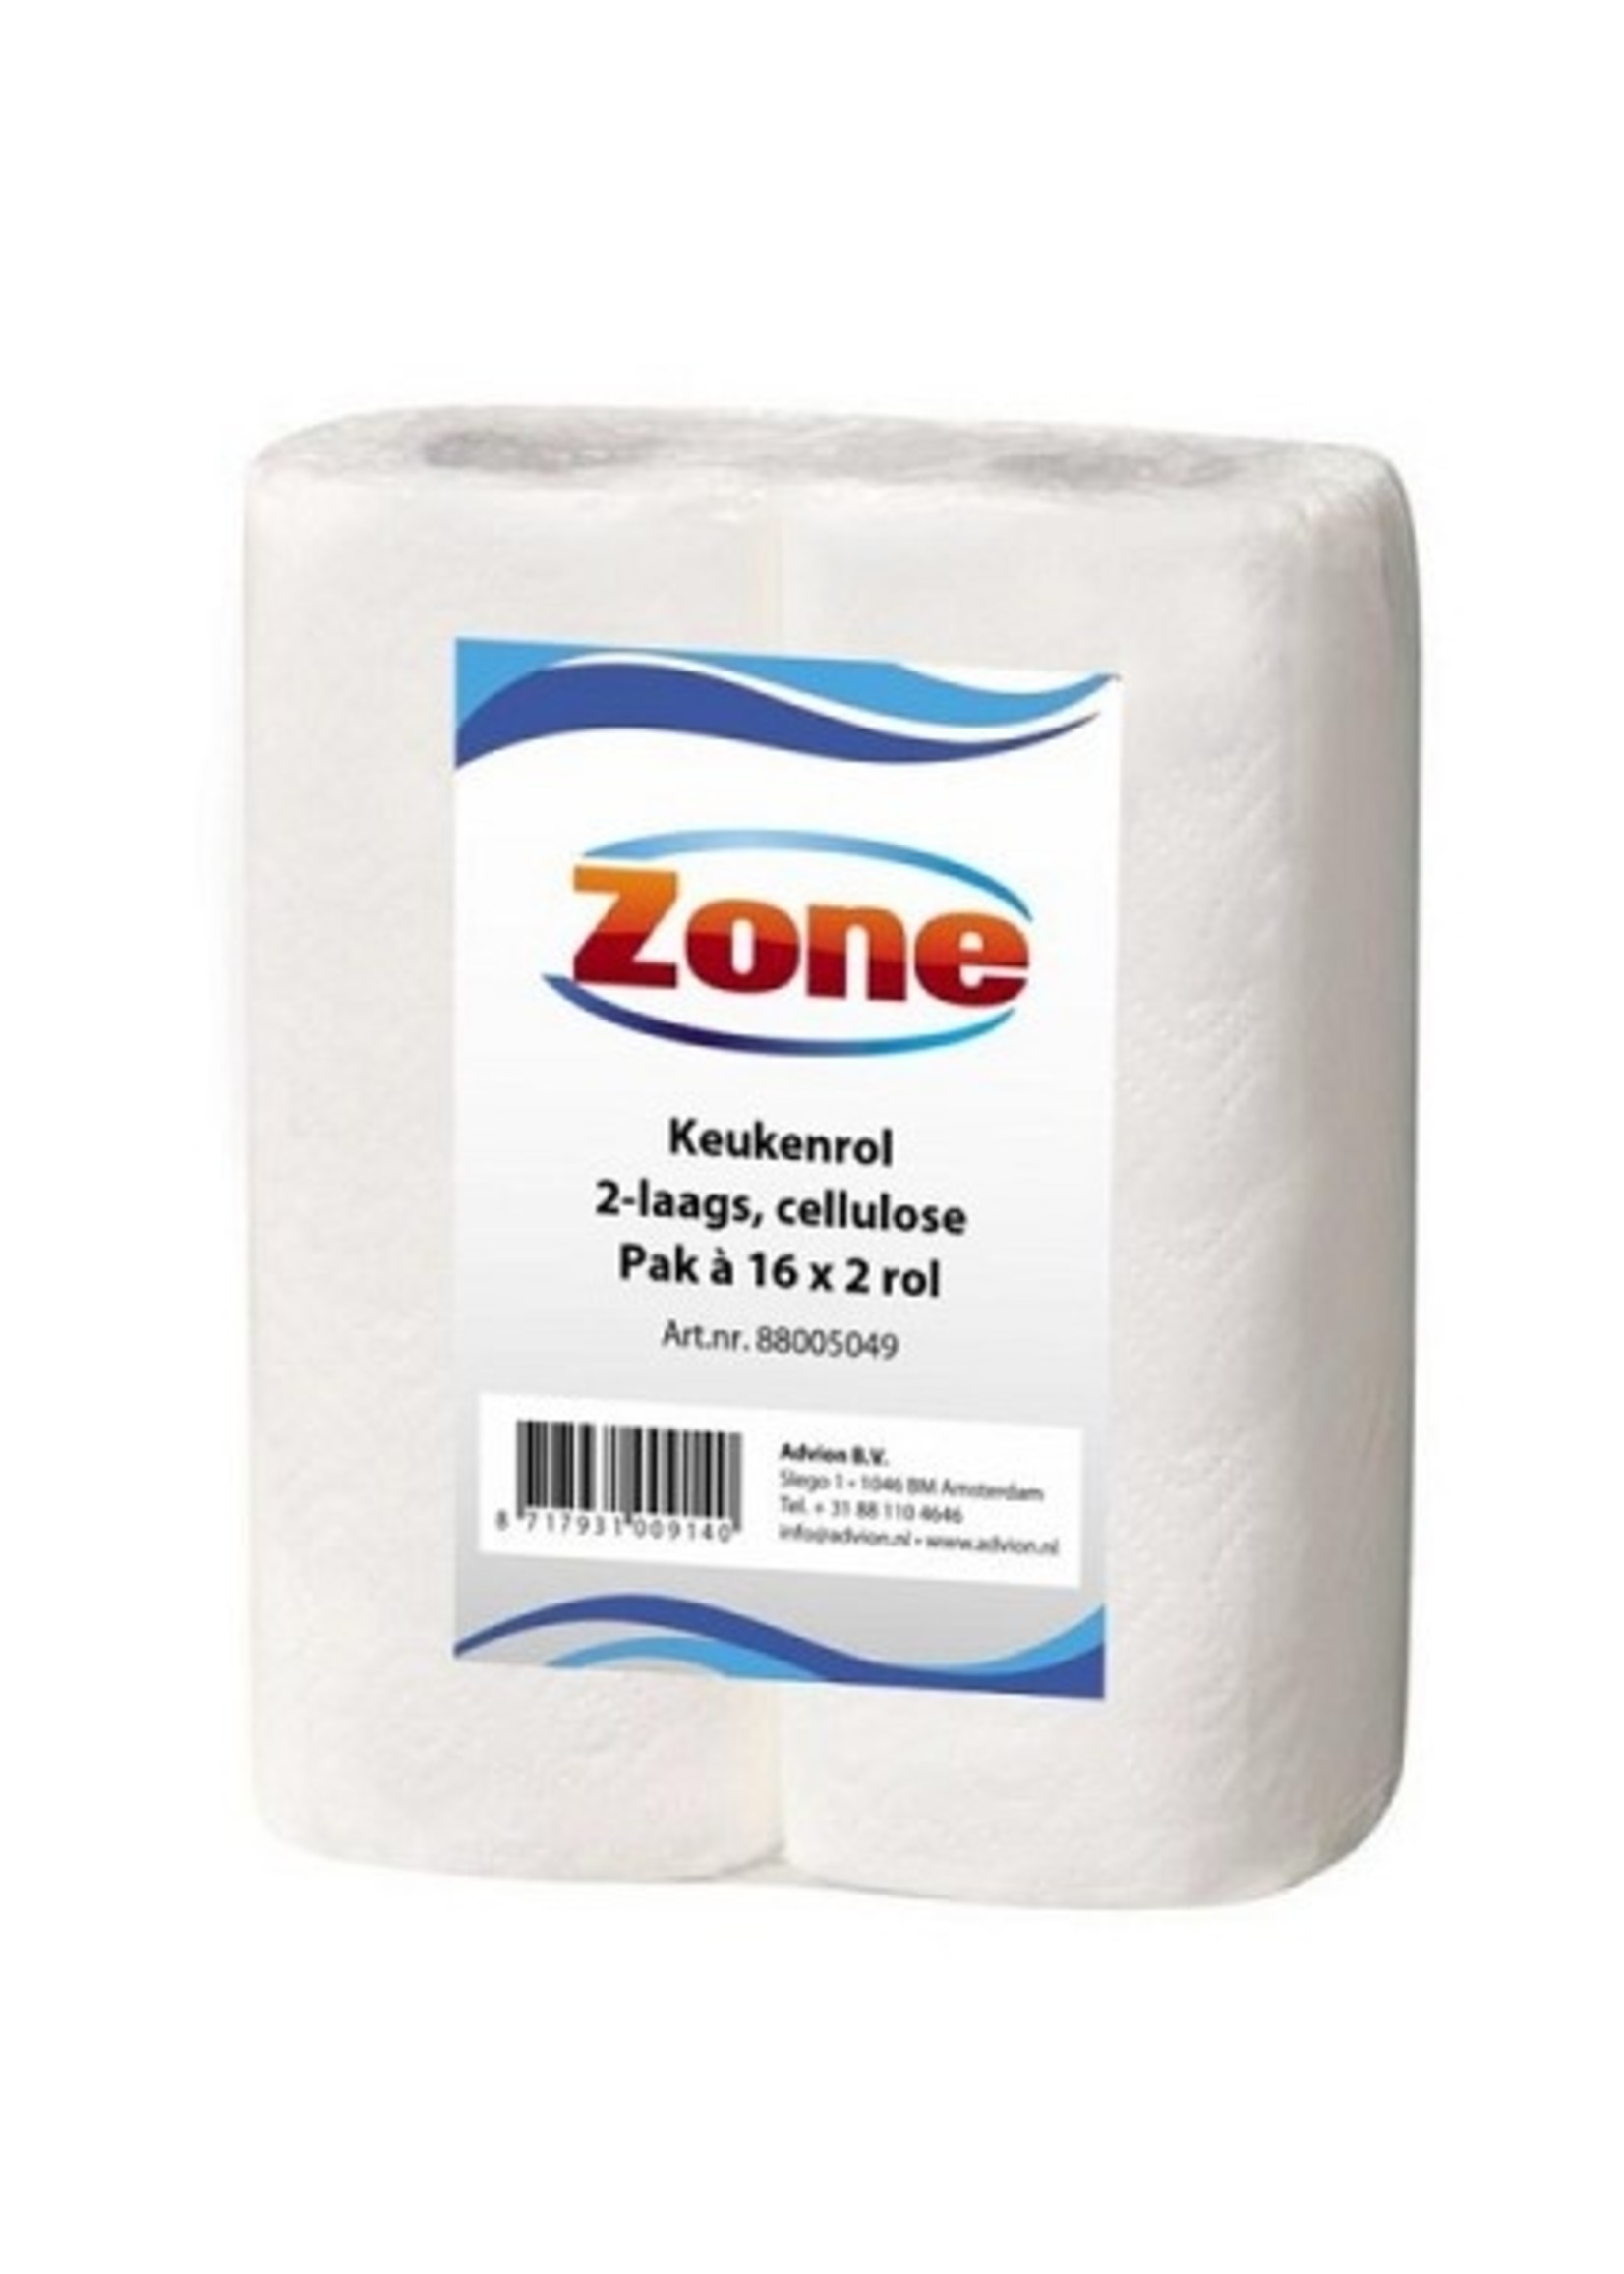 Zone Keukenrol 2-laags Cellulose 2rol